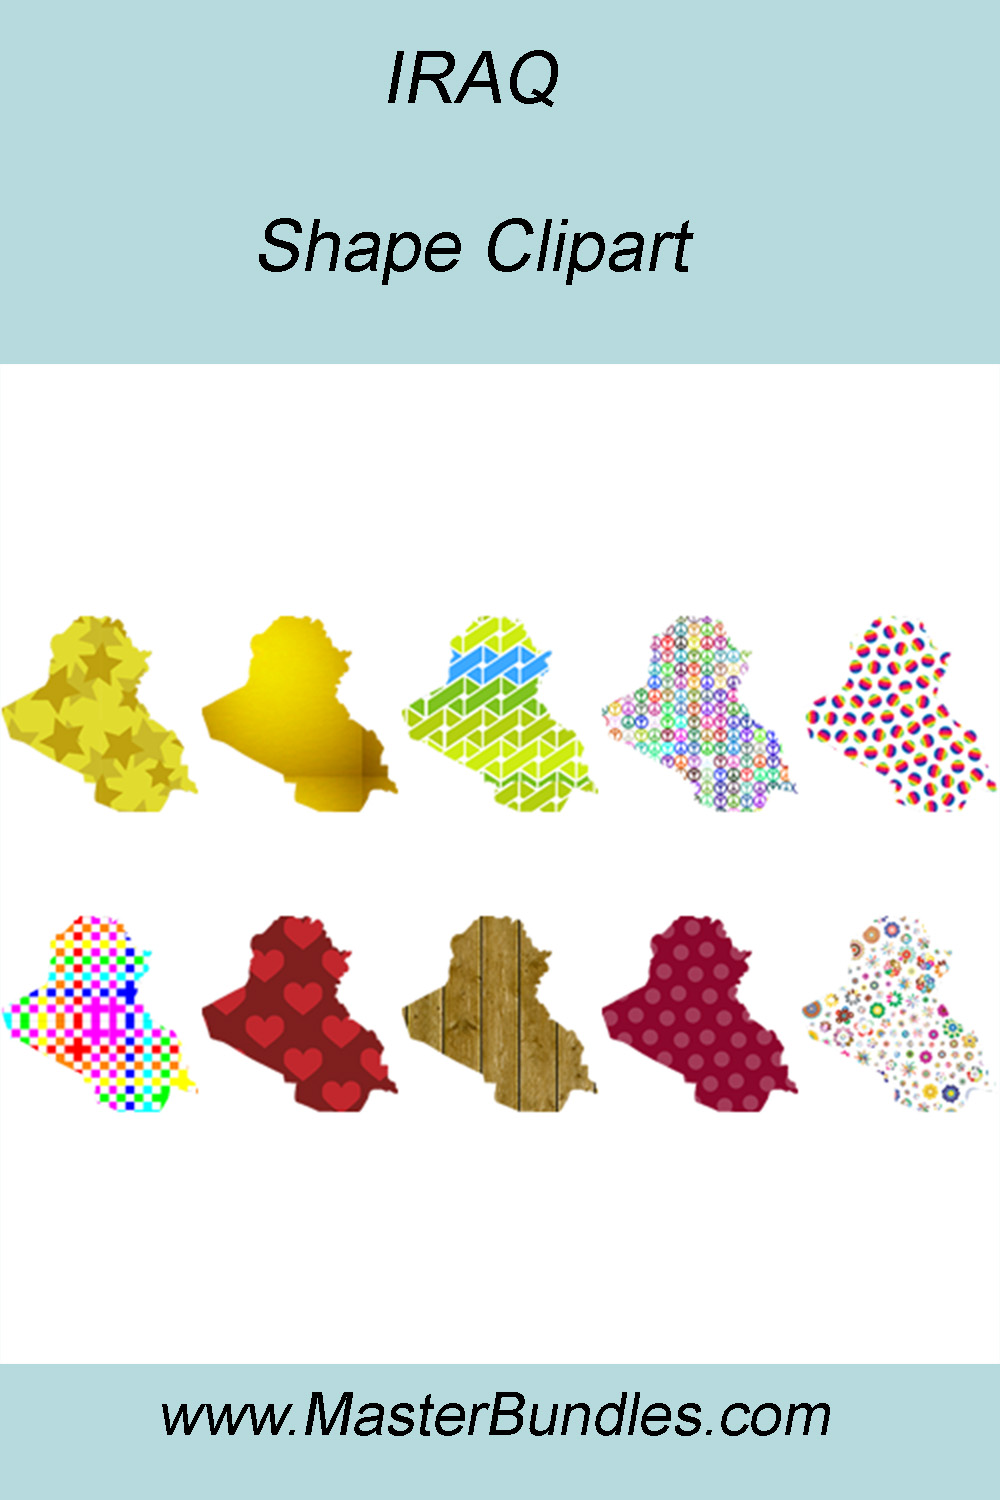 IRAQ SHAPE CLIPART ICONS pinterest preview image.